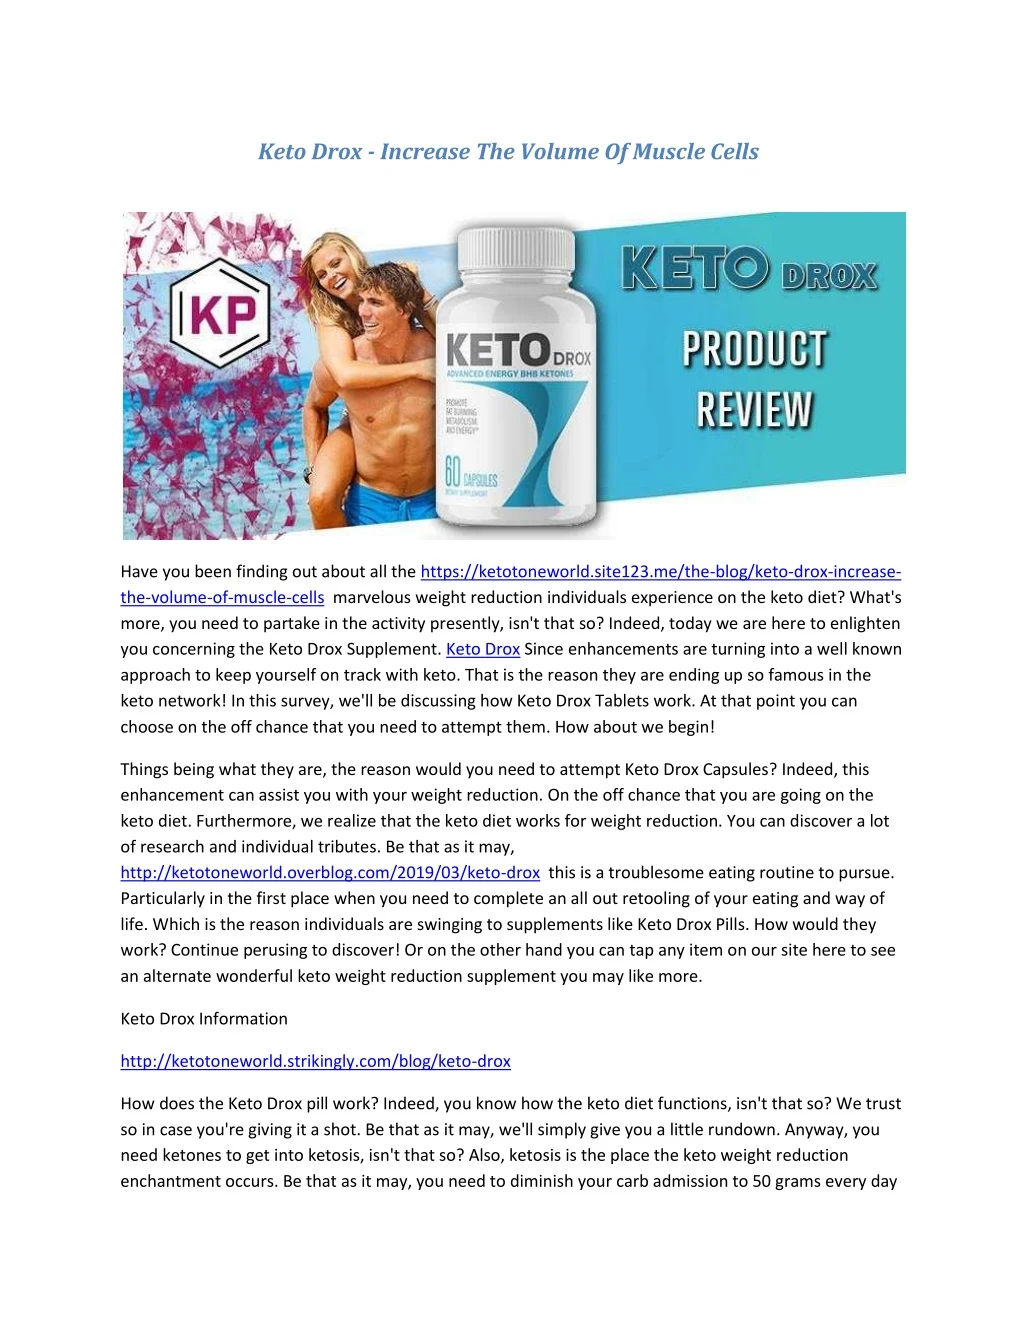 keto drox increase the volume of muscle cells